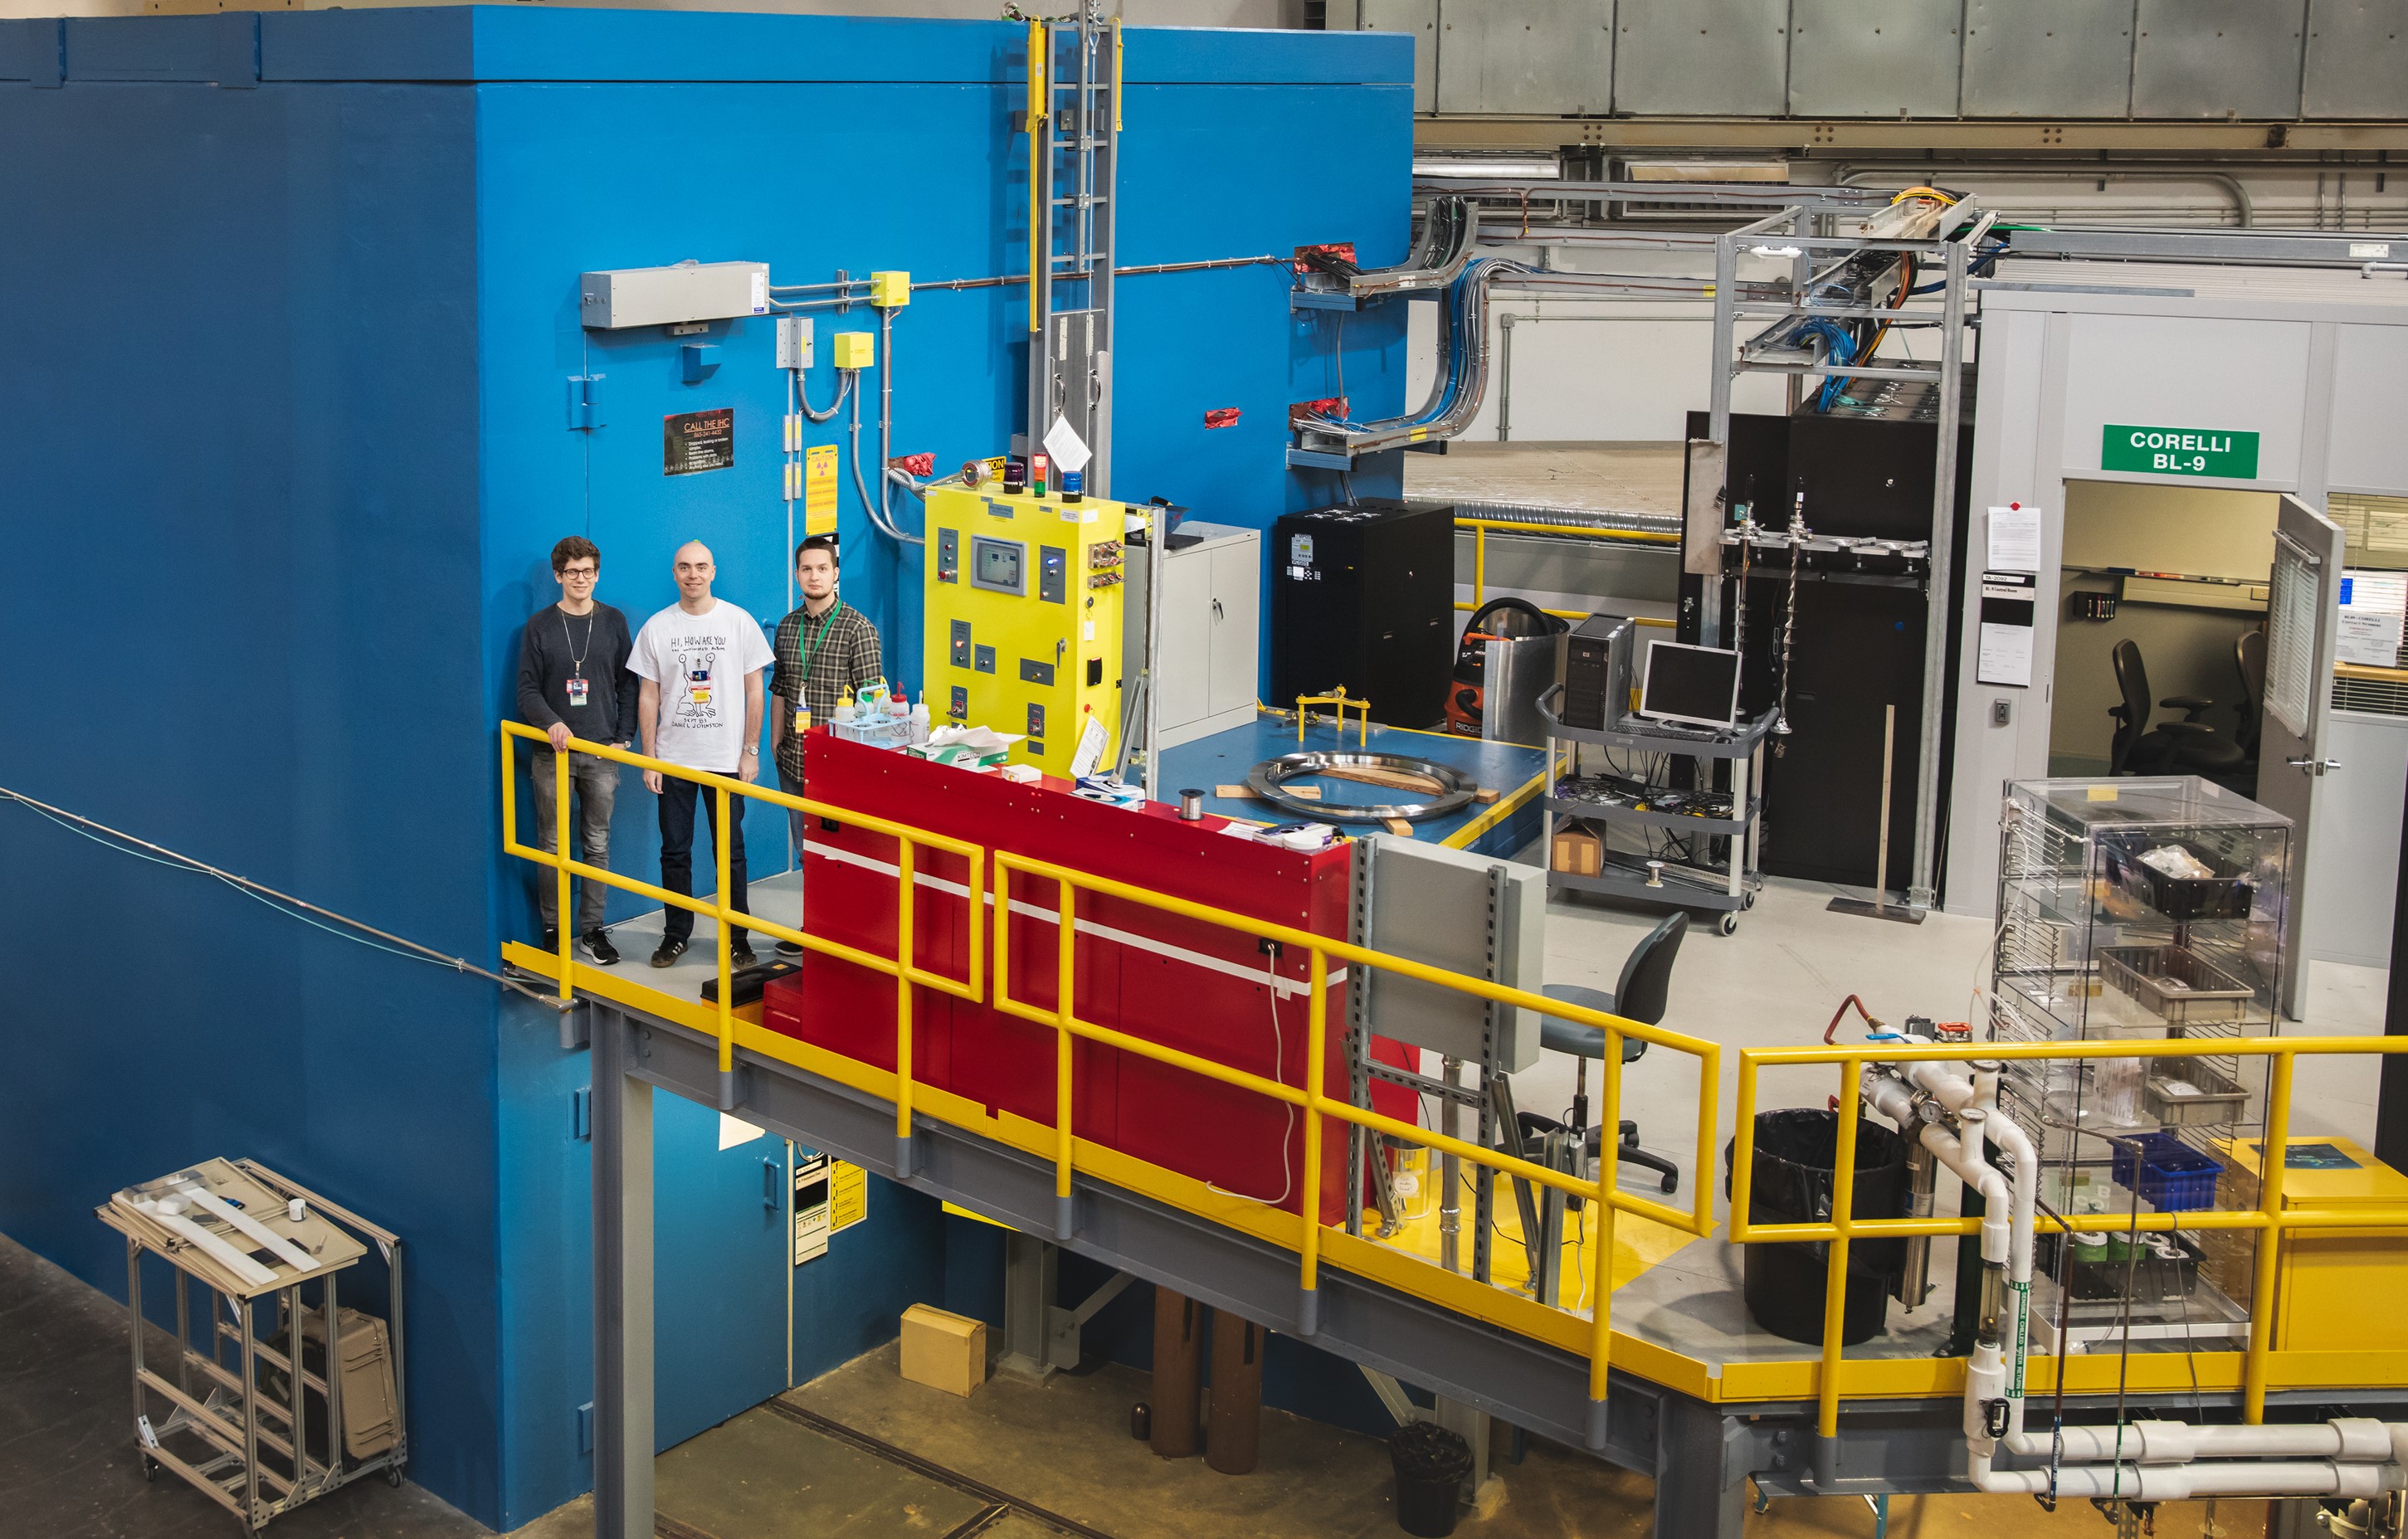 The research team, (left) Kristoffer Holm, Nikolaj Roth, and Emil Klahn, stands next to the CORELLI neutron scattering instrument at ORNL’s Spallation Neutron Source. (Credit: ORNL/Genevieve Martin) 